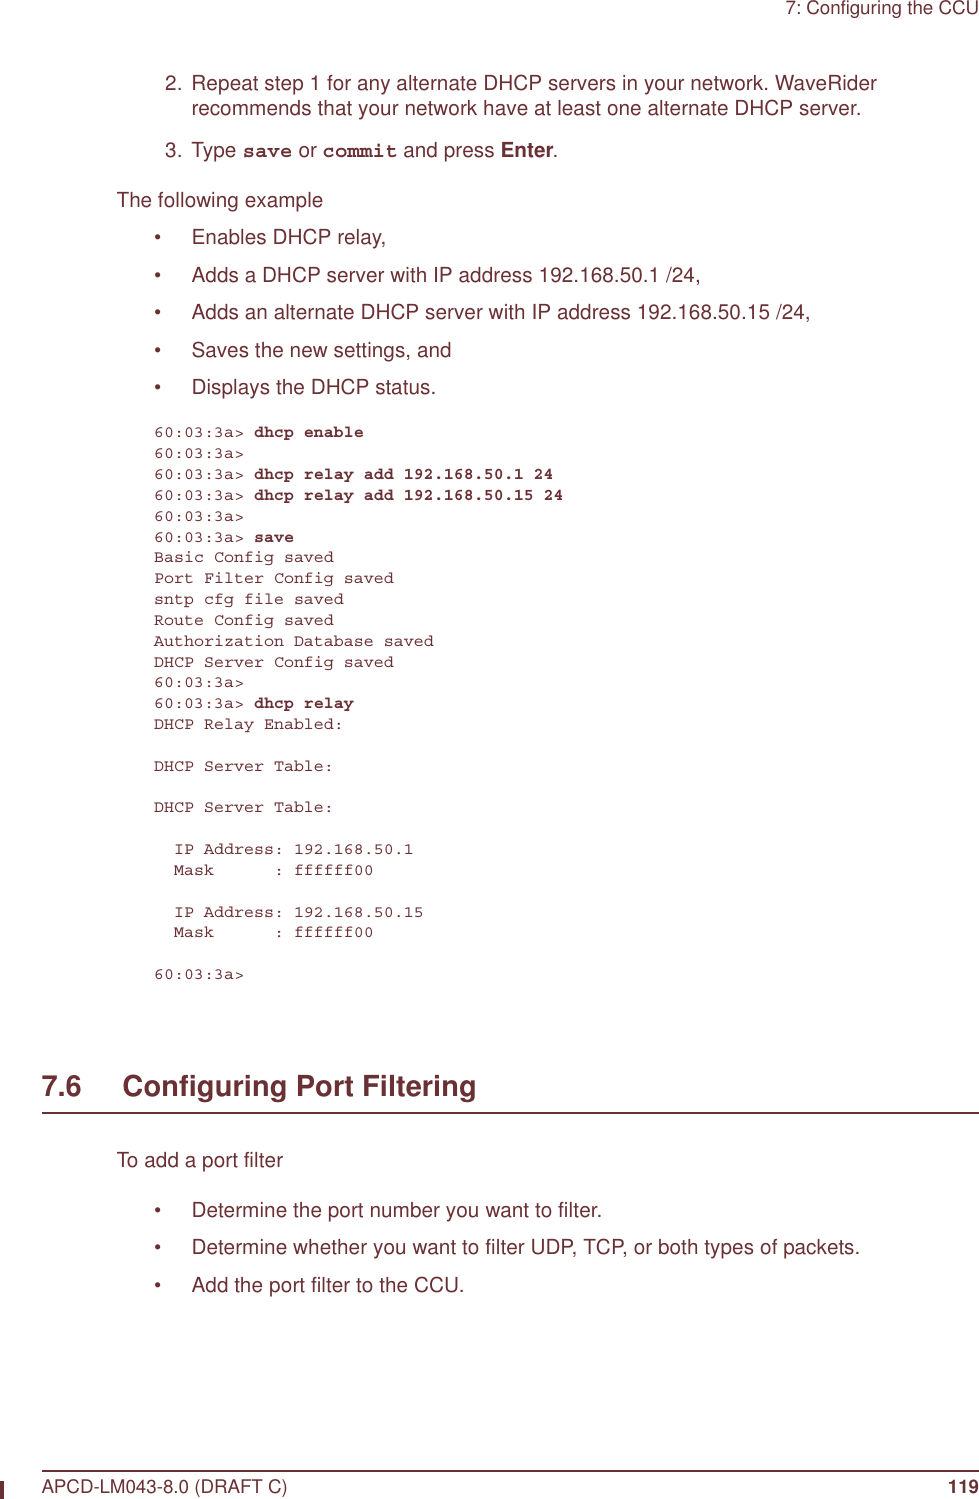 7: Configuring the CCUAPCD-LM043-8.0 (DRAFT C) 119  2. Repeat step 1 for any alternate DHCP servers in your network. WaveRider recommends that your network have at least one alternate DHCP server. 3. Type save or commit and press Enter.The following example • Enables DHCP relay,• Adds a DHCP server with IP address 192.168.50.1 /24,• Adds an alternate DHCP server with IP address 192.168.50.15 /24,• Saves the new settings, and • Displays the DHCP status.60:03:3a&gt; dhcp enable60:03:3a&gt;60:03:3a&gt; dhcp relay add 192.168.50.1 2460:03:3a&gt; dhcp relay add 192.168.50.15 2460:03:3a&gt;60:03:3a&gt; saveBasic Config savedPort Filter Config savedsntp cfg file savedRoute Config savedAuthorization Database savedDHCP Server Config saved60:03:3a&gt;60:03:3a&gt; dhcp relayDHCP Relay Enabled:DHCP Server Table:DHCP Server Table:  IP Address: 192.168.50.1  Mask      : ffffff00  IP Address: 192.168.50.15  Mask      : ffffff0060:03:3a&gt;7.6     Configuring Port FilteringTo add a port filter• Determine the port number you want to filter.• Determine whether you want to filter UDP, TCP, or both types of packets.• Add the port filter to the CCU.